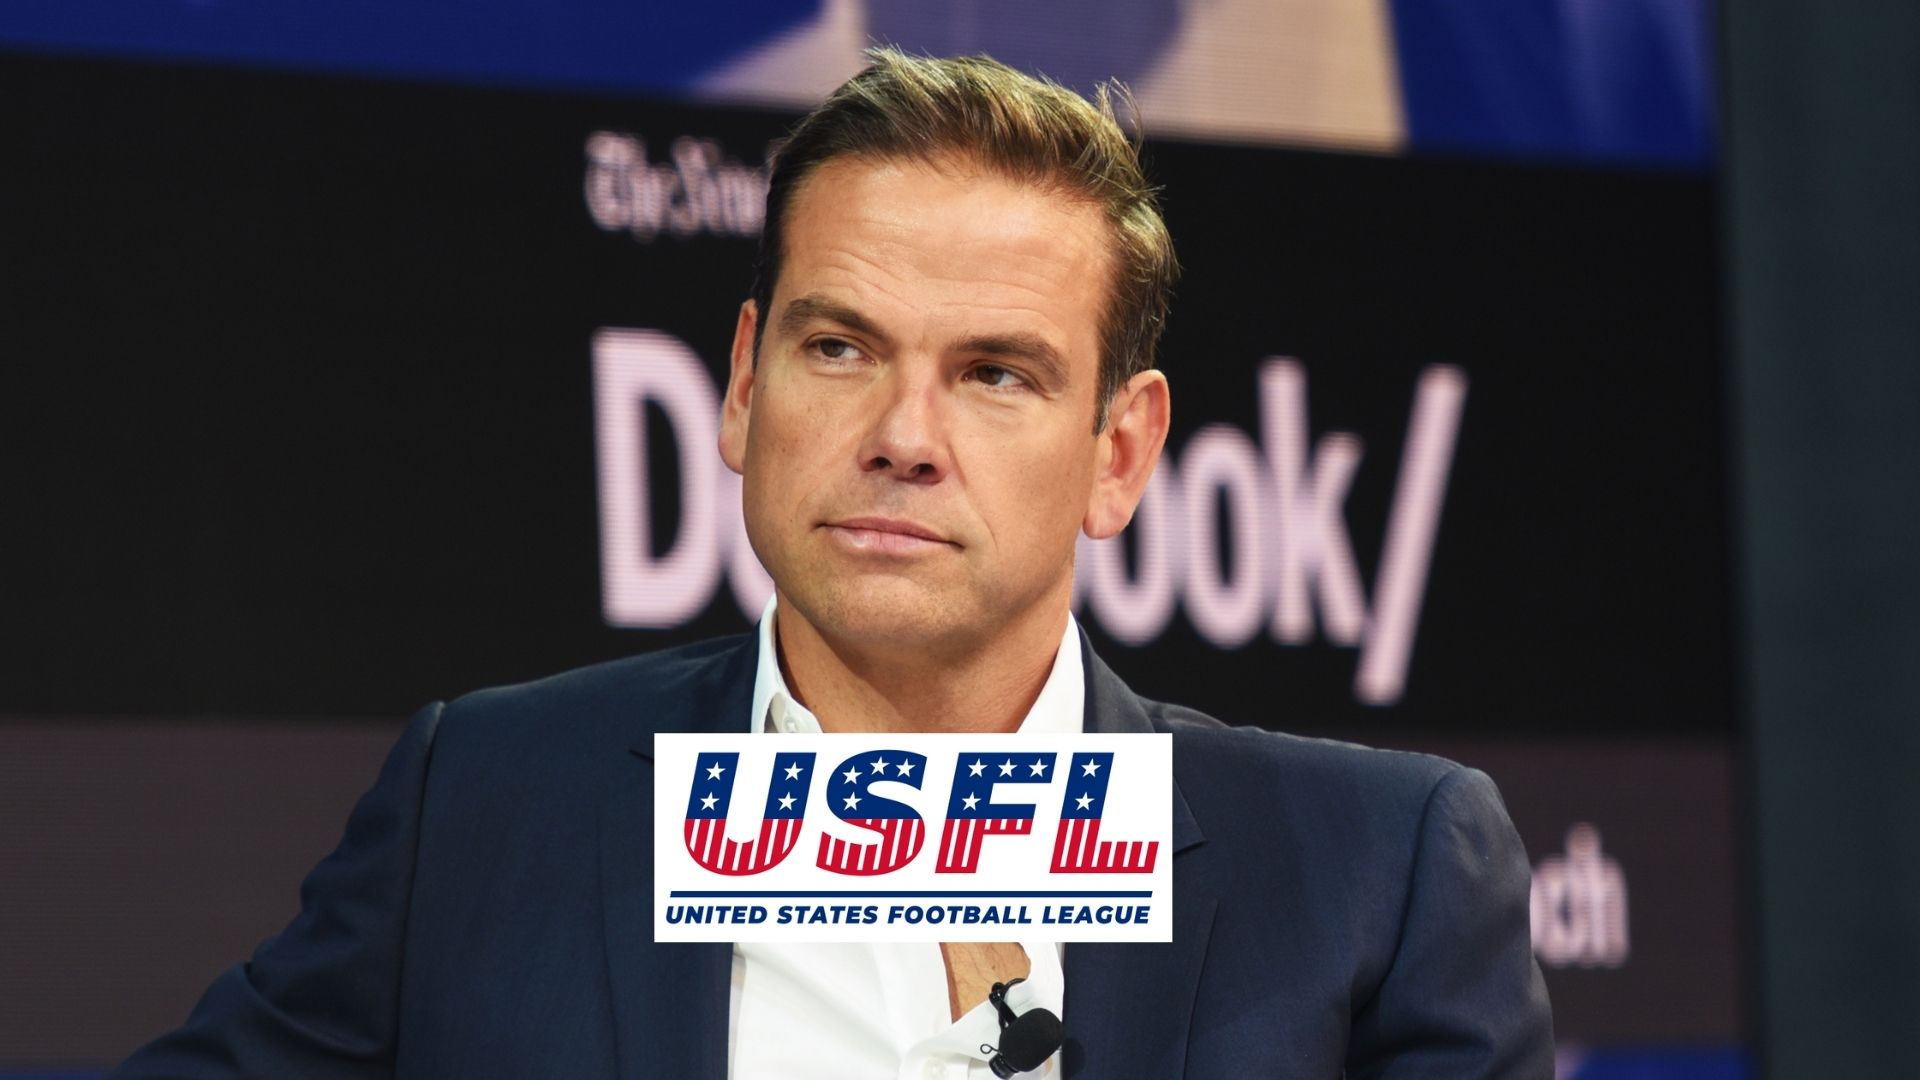 Fox CEO Lachlan Murdoch Sees USFL Team Owners In 57 Years